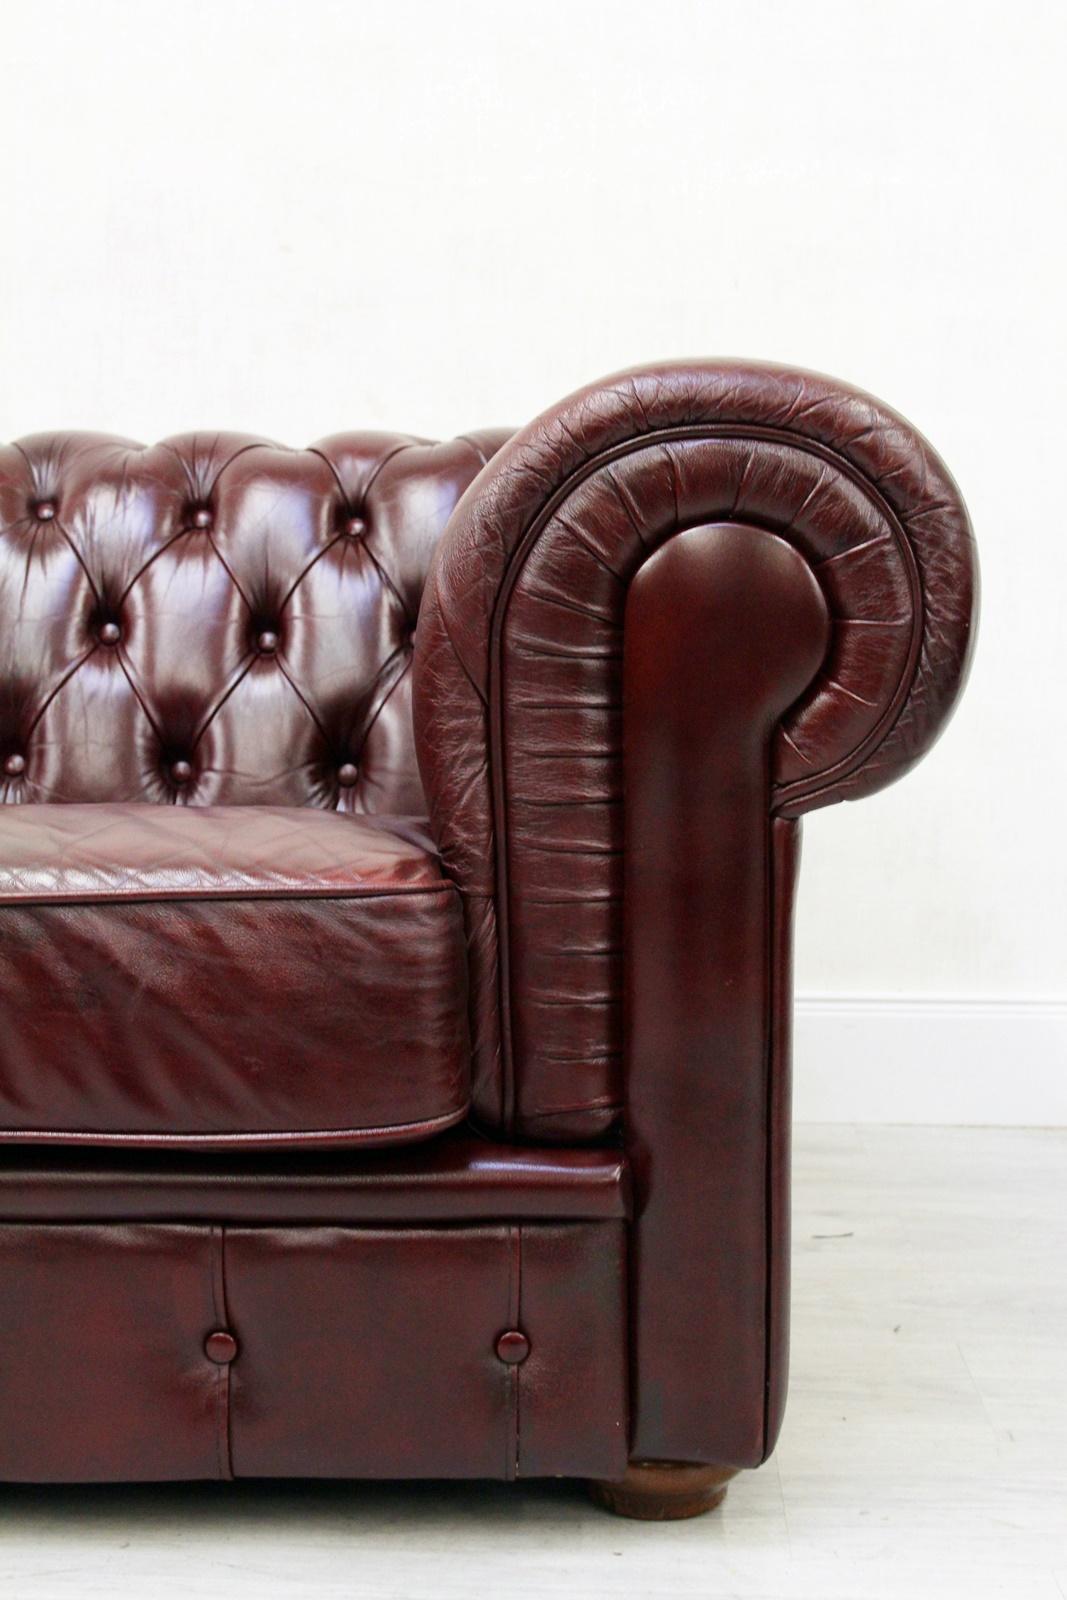 Chesterfield real leather threesome sofa
in original design

Condition: The sofa is in good condition (patina)
sofa
Measures: Height 70 cm, length 200 cm, depth 90 cm
Upholstery is in good condition with patina (see photos).
Color: Oxblood /